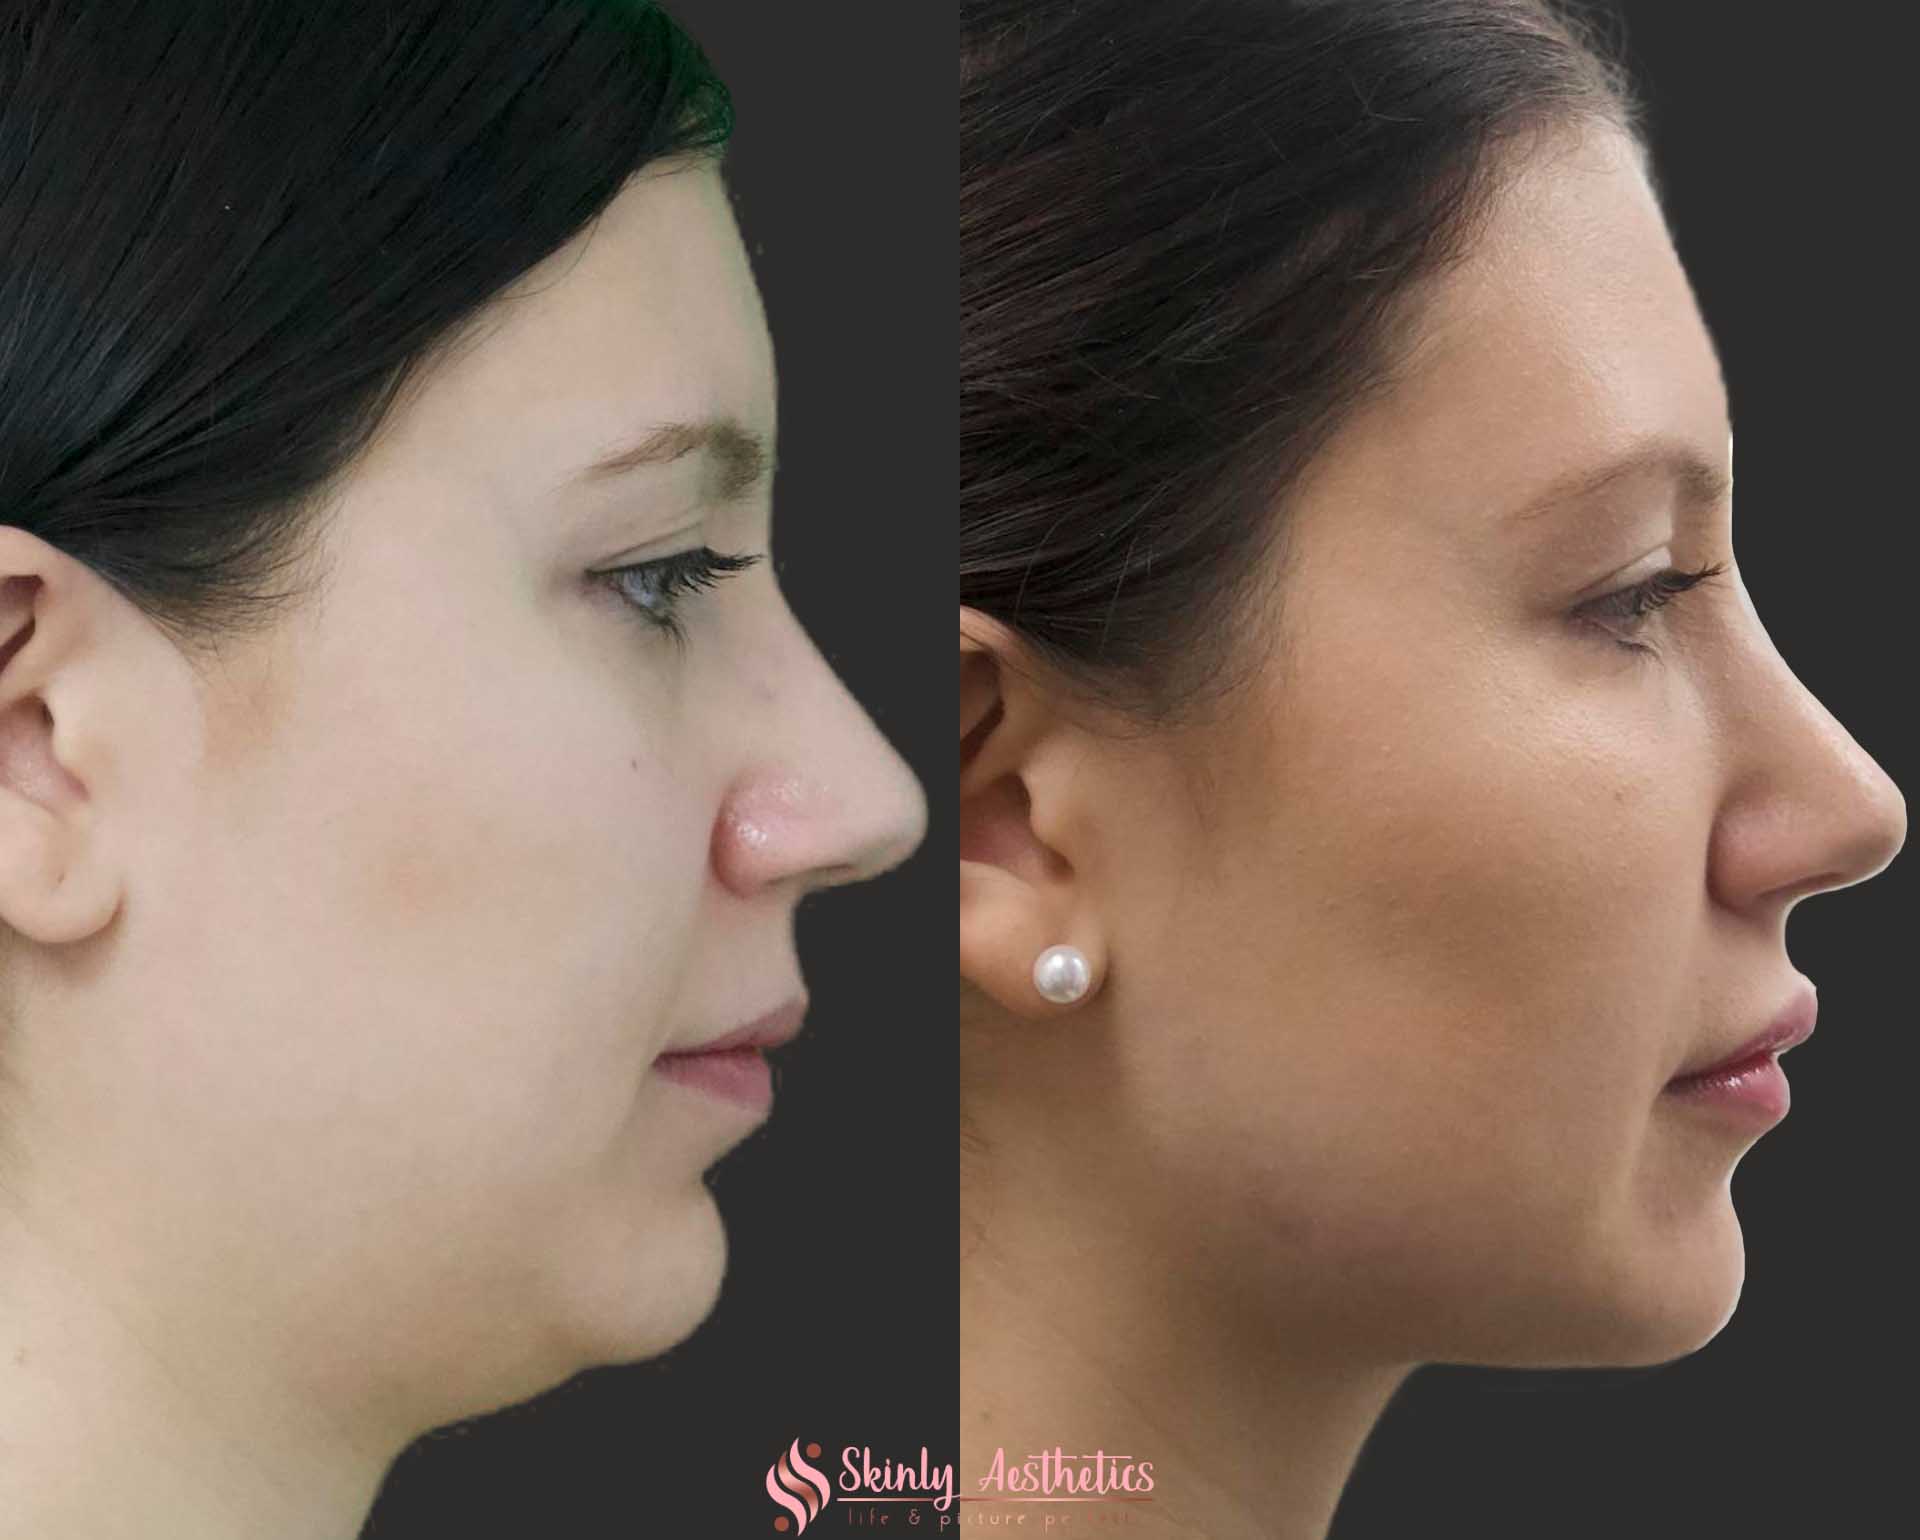 before and after results following jawline sculpting with coolsculpting, kybella and juvederm dermal filler